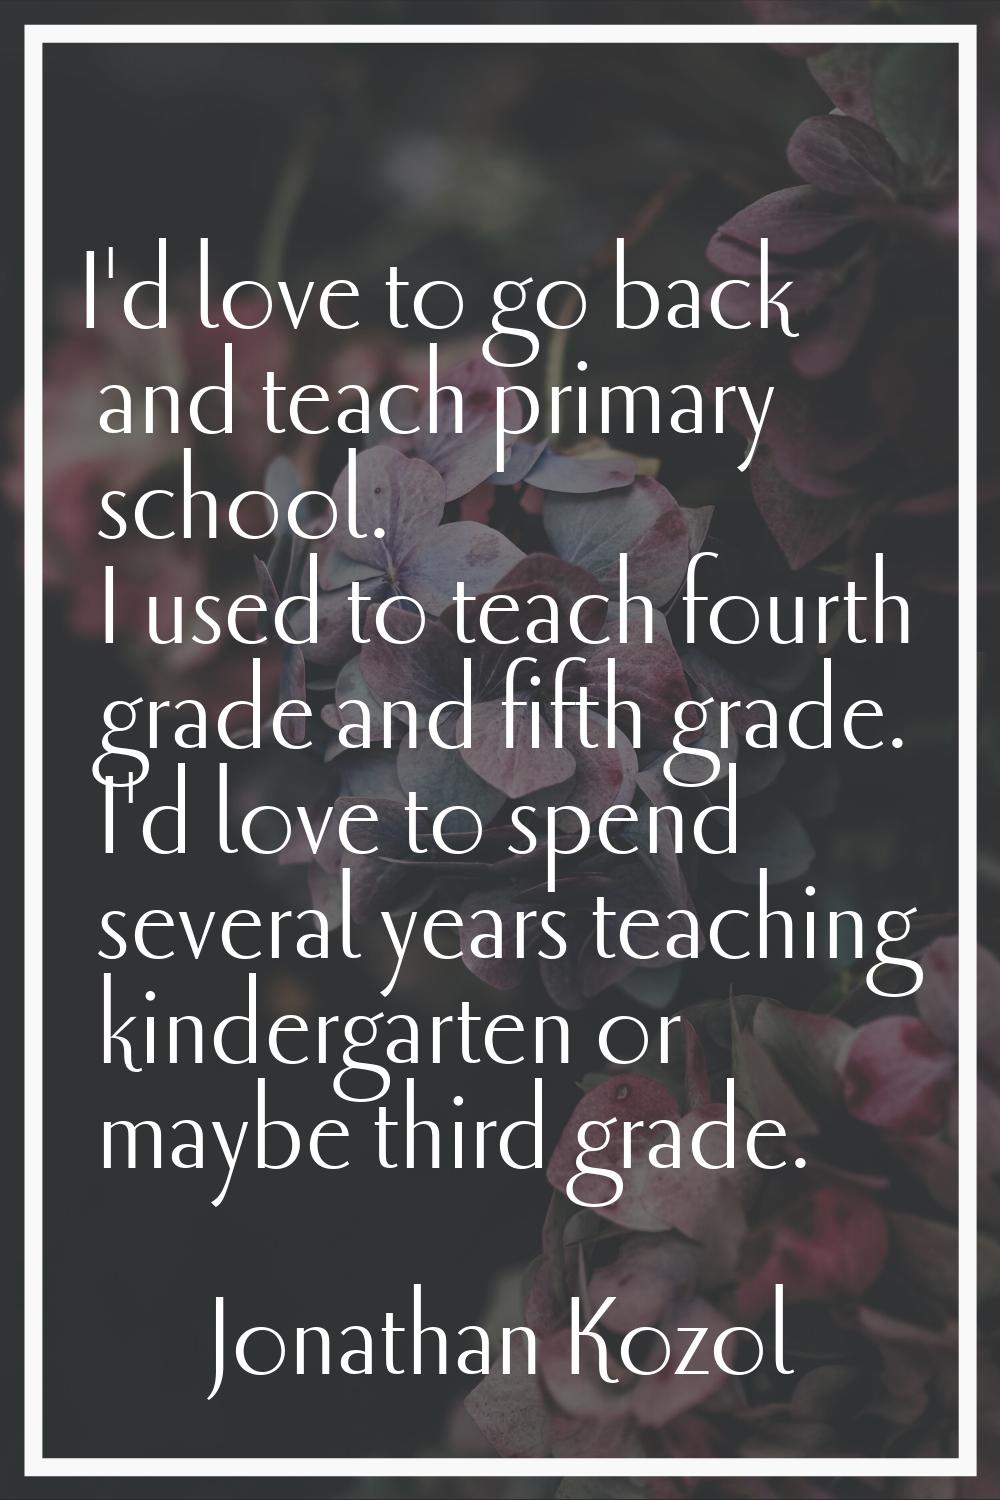 I'd love to go back and teach primary school. I used to teach fourth grade and fifth grade. I'd lov